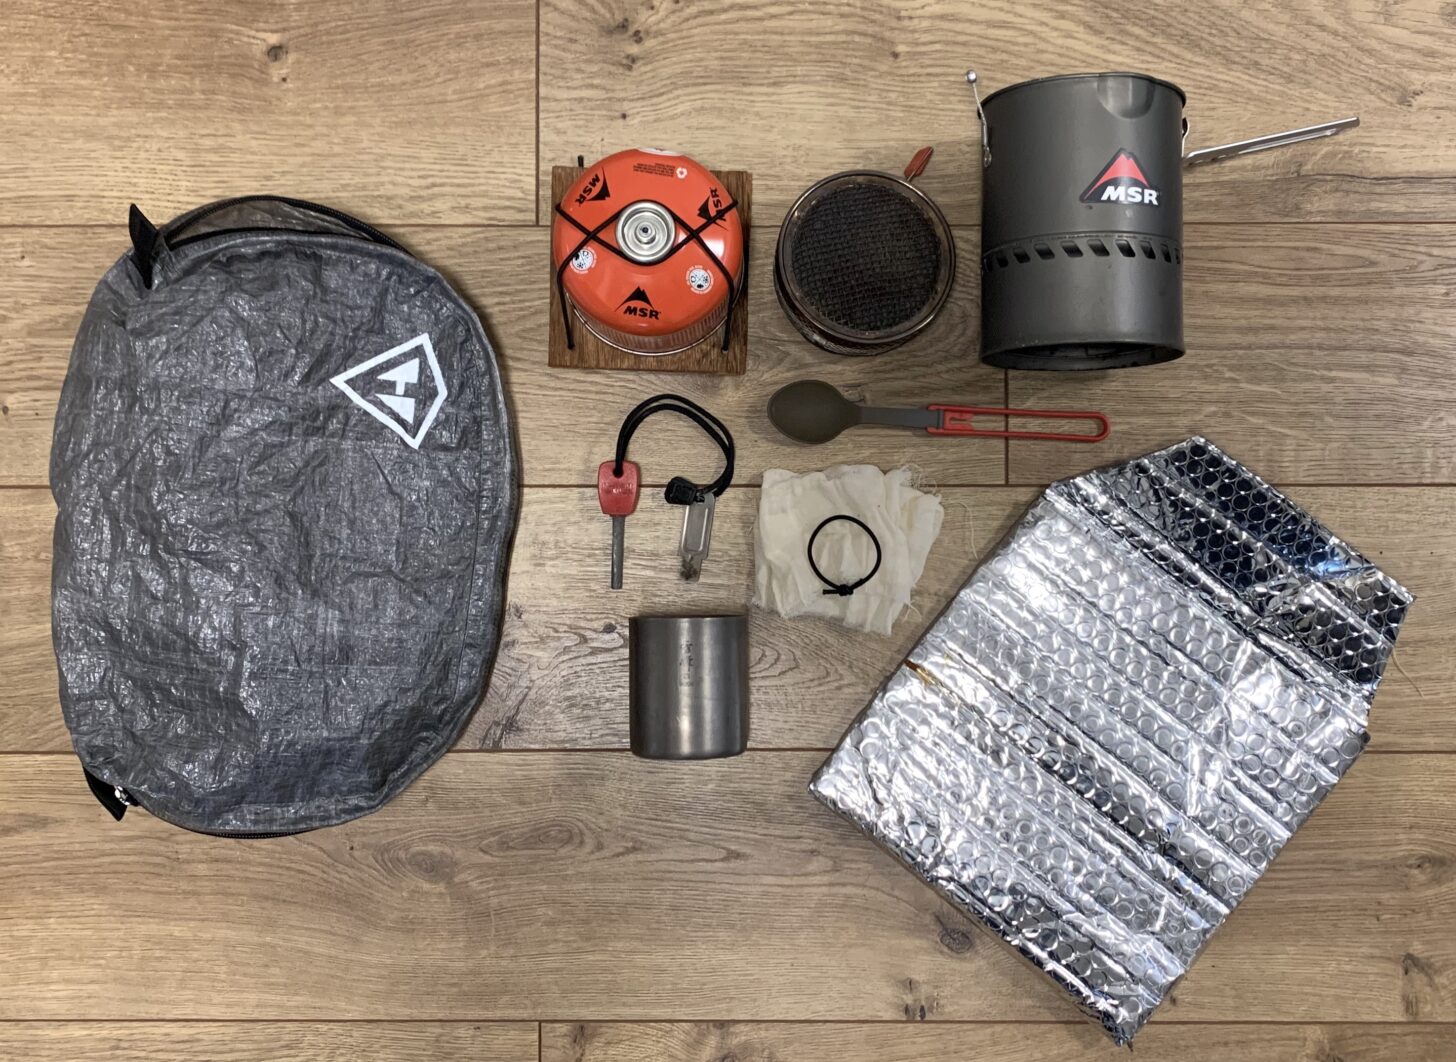 layout of cooking gear, including a zippered stow bag, fuel canister on a plywood base, radiant burner stove, heat exchanger cook pot, folding spoon, fire starter, titanium mug, cheesecloth for filtering melted snow into a water bottle, and homemade reflective bubble wrap food cozy